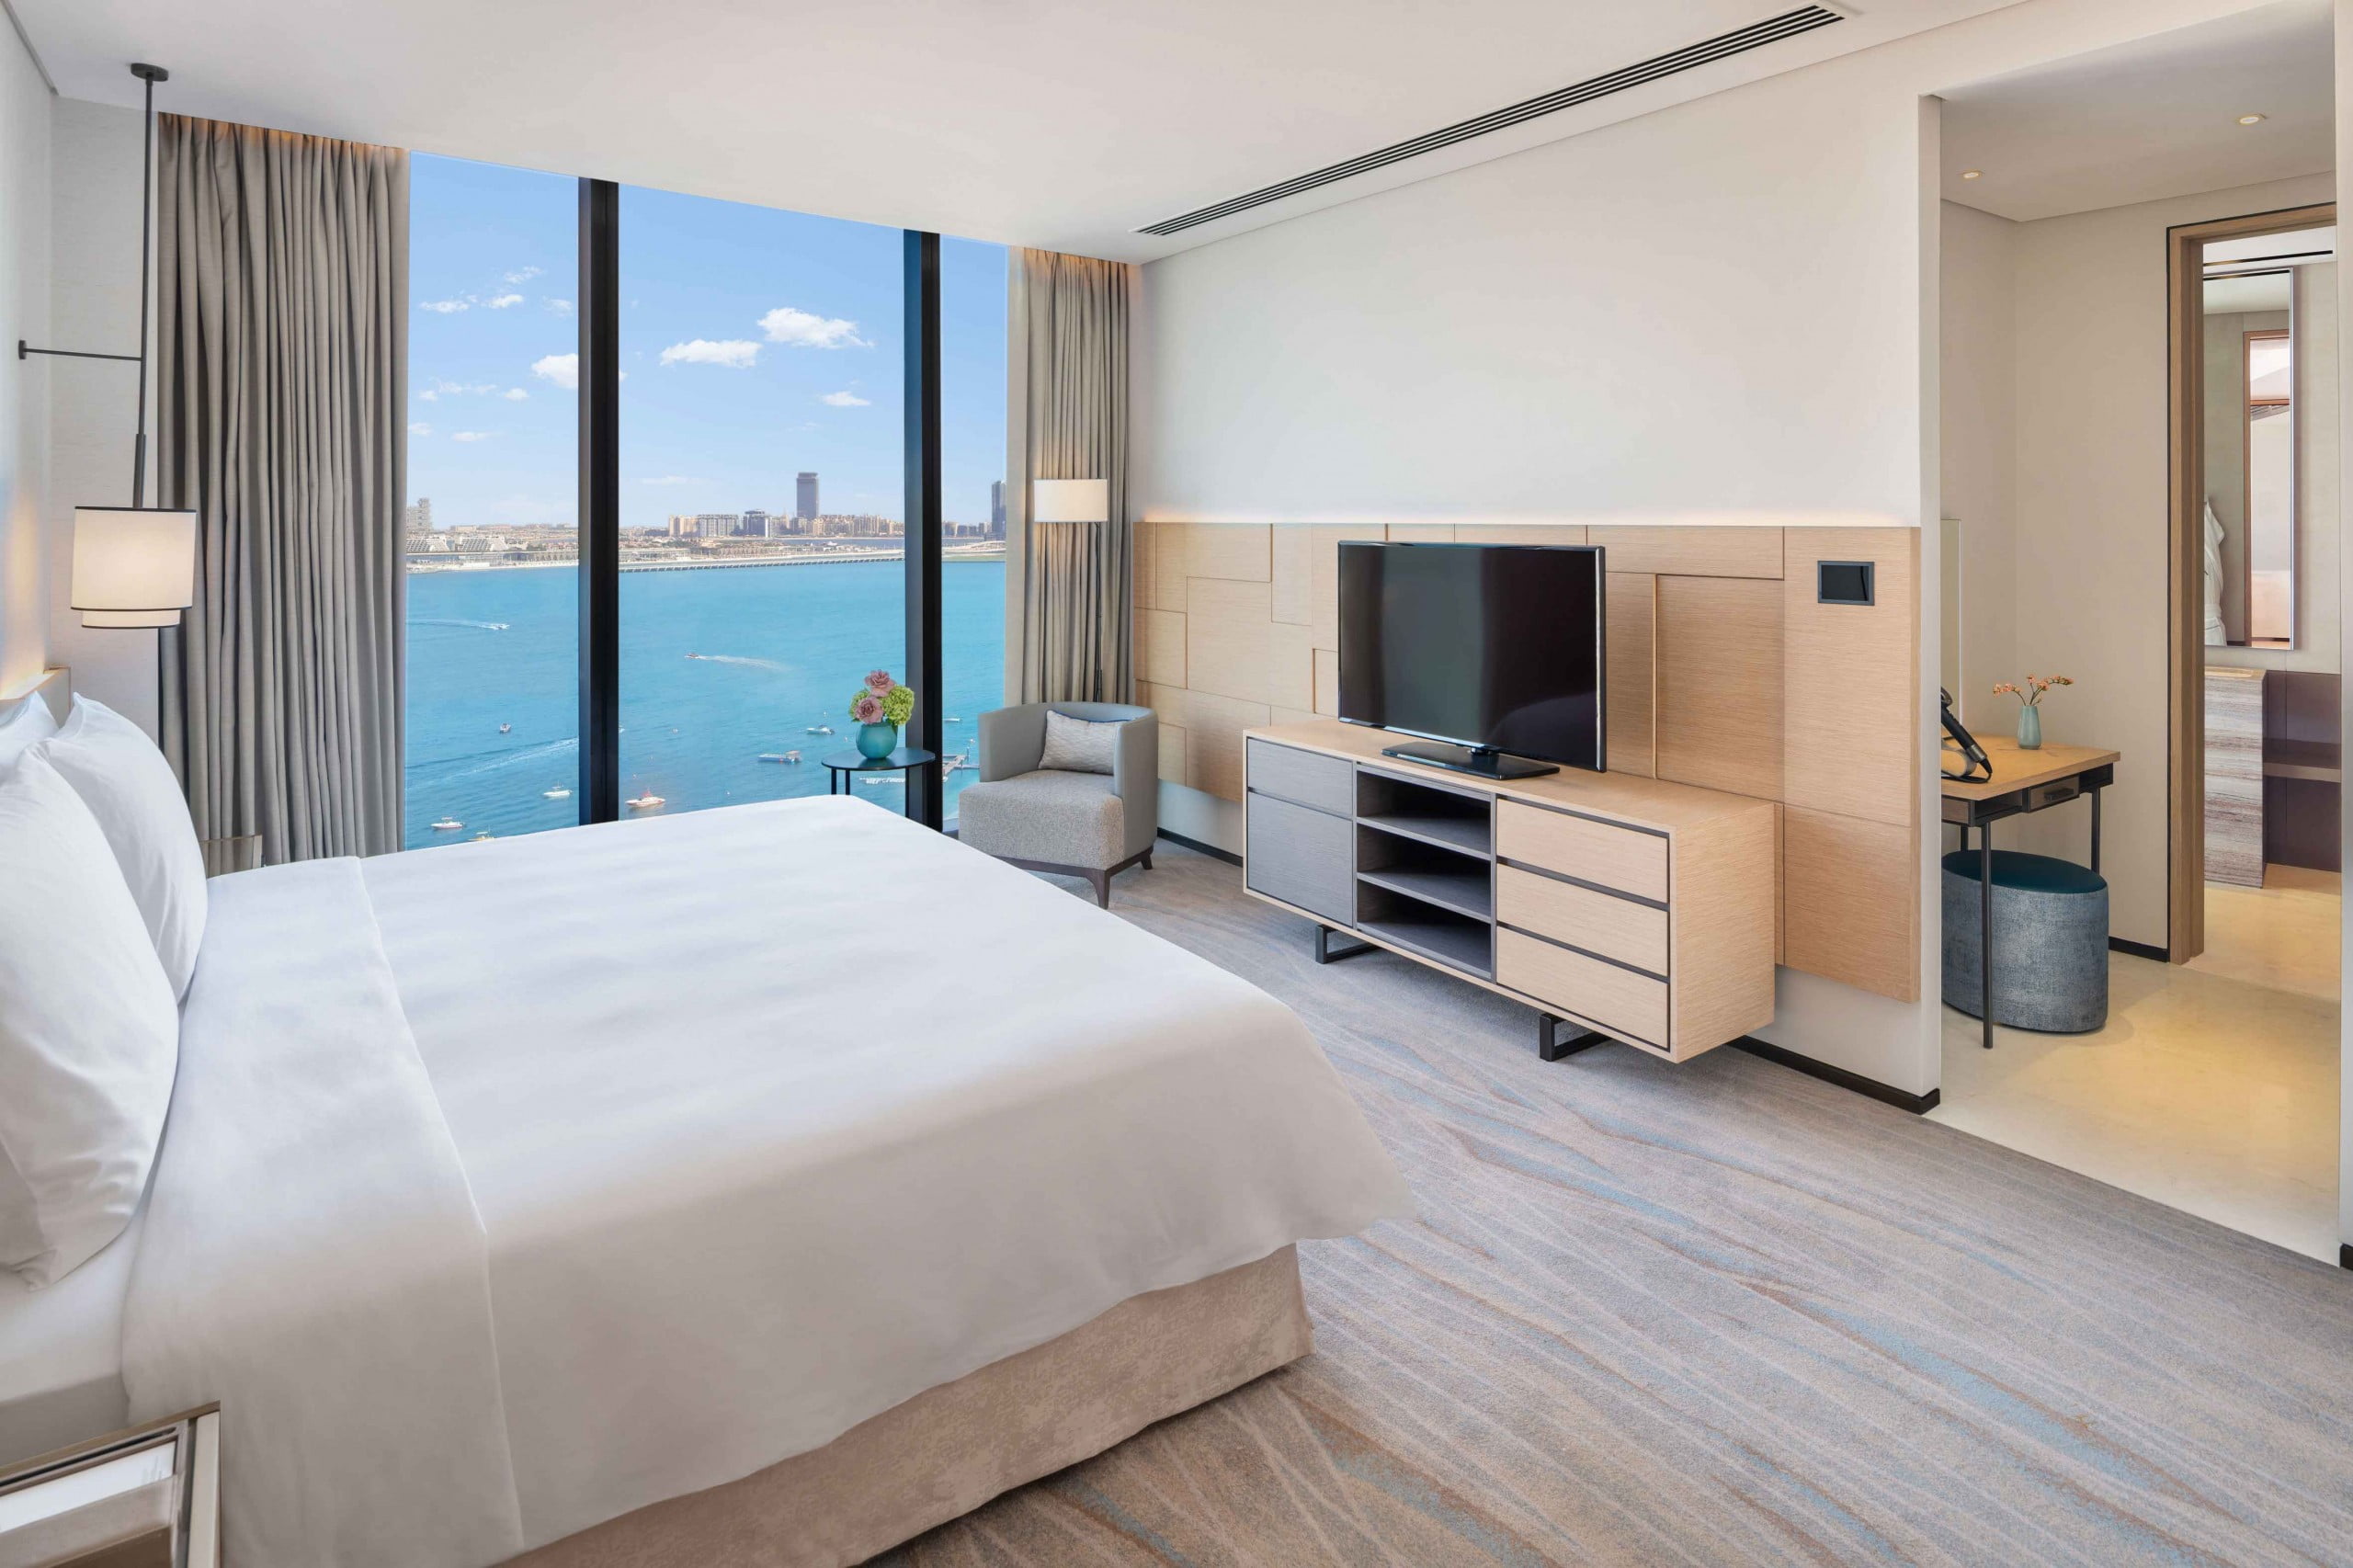 Deluxe 1 BR Suite Bedroom Sea Facing 5 scaled - Immobilier Dubai